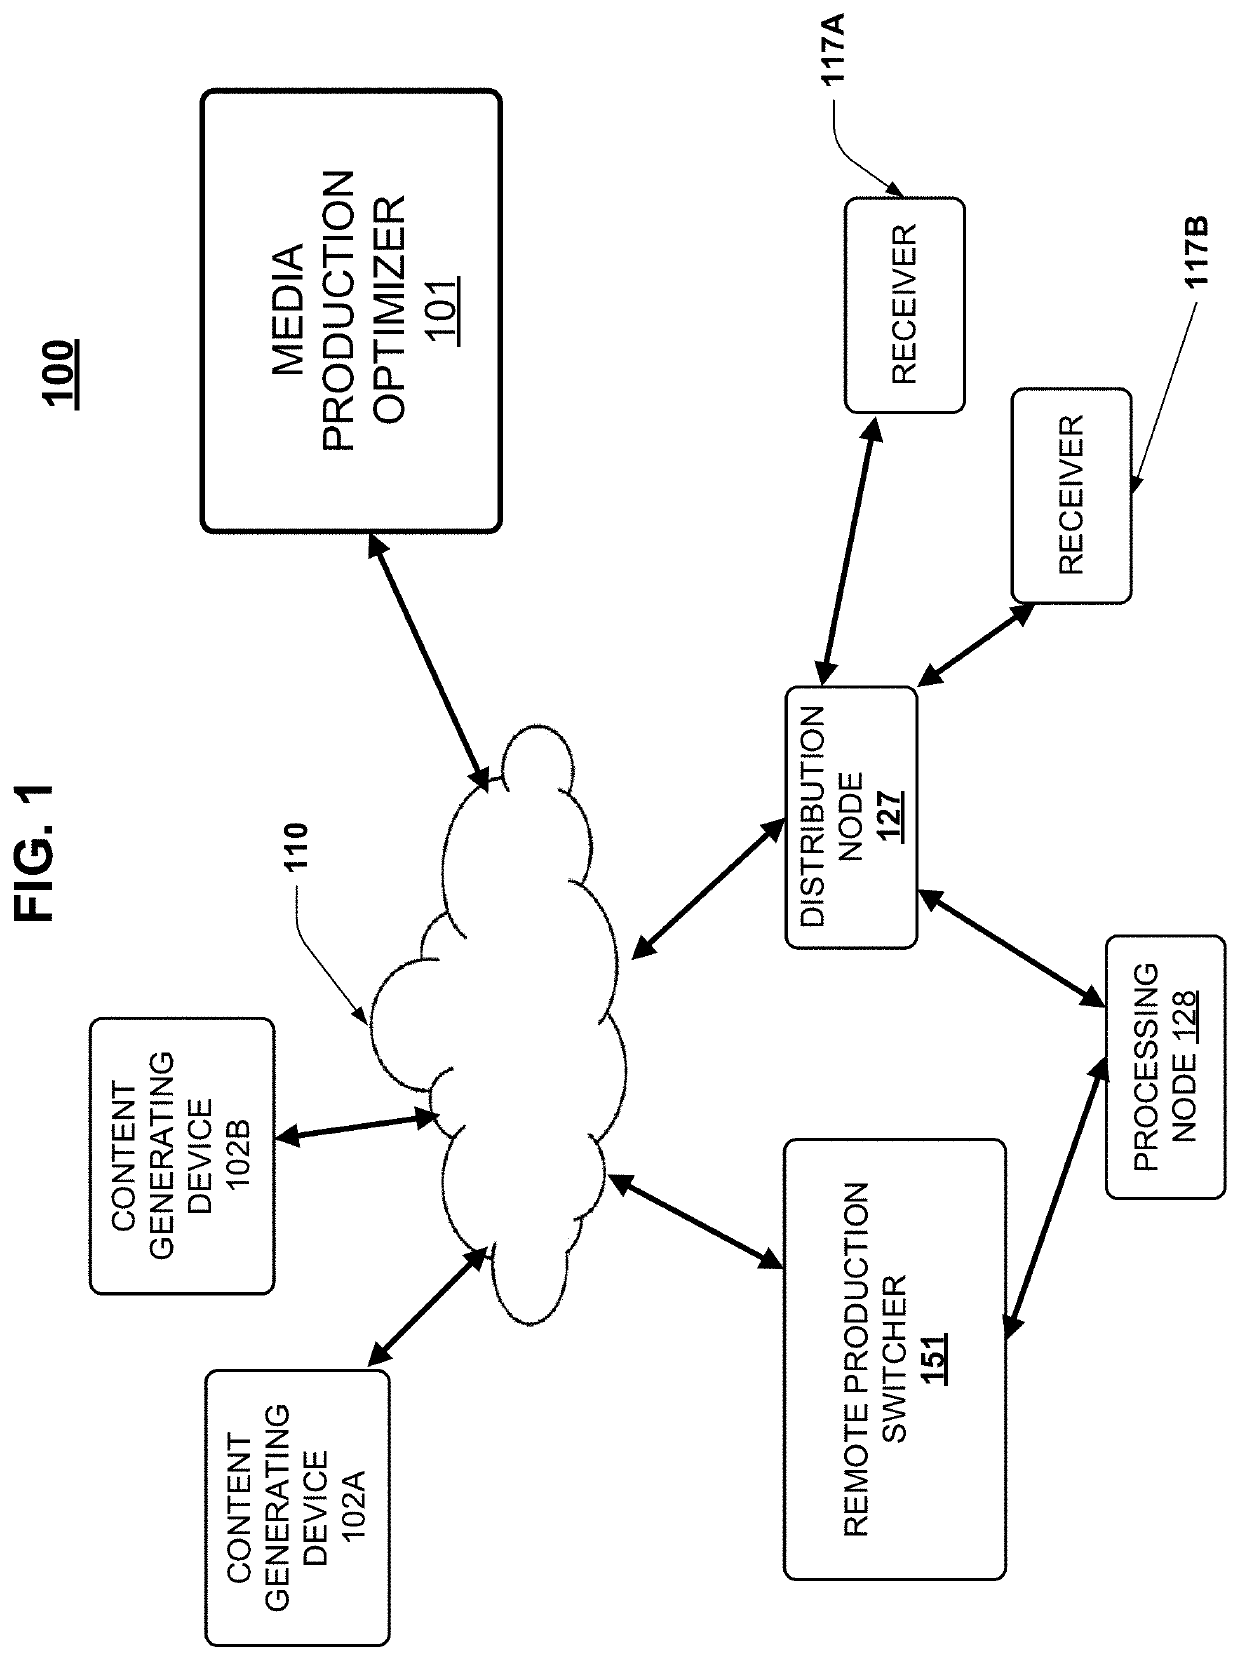 System and method for generating a factory layout for optimizing media content production